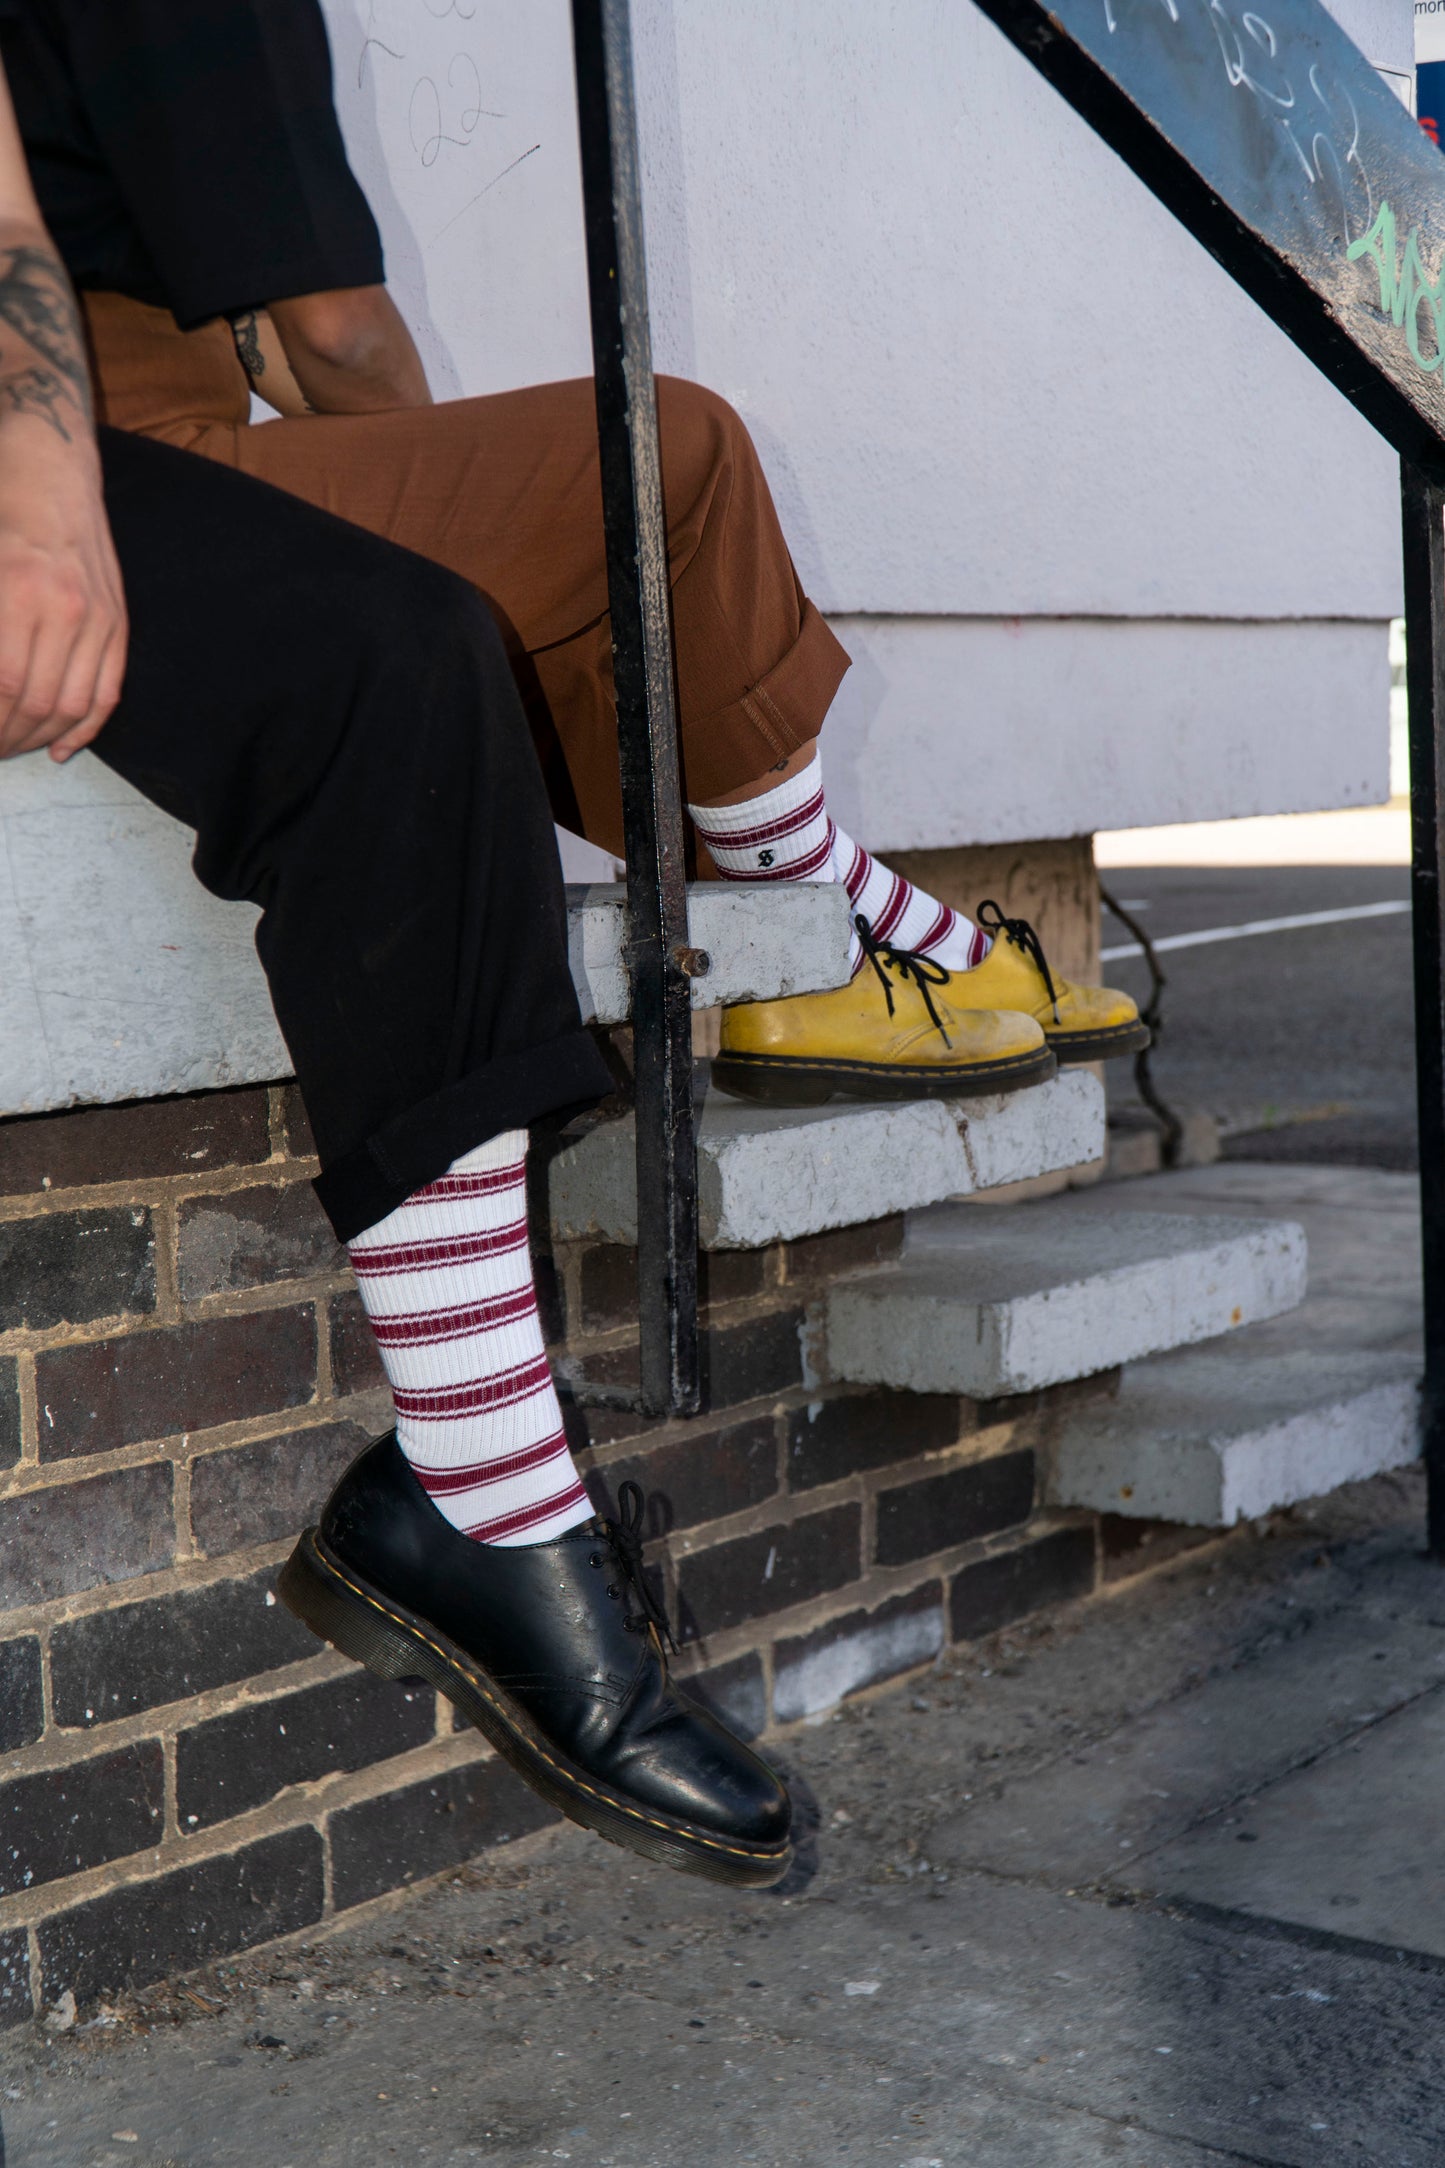 Striped Crew Sock (White and Red)